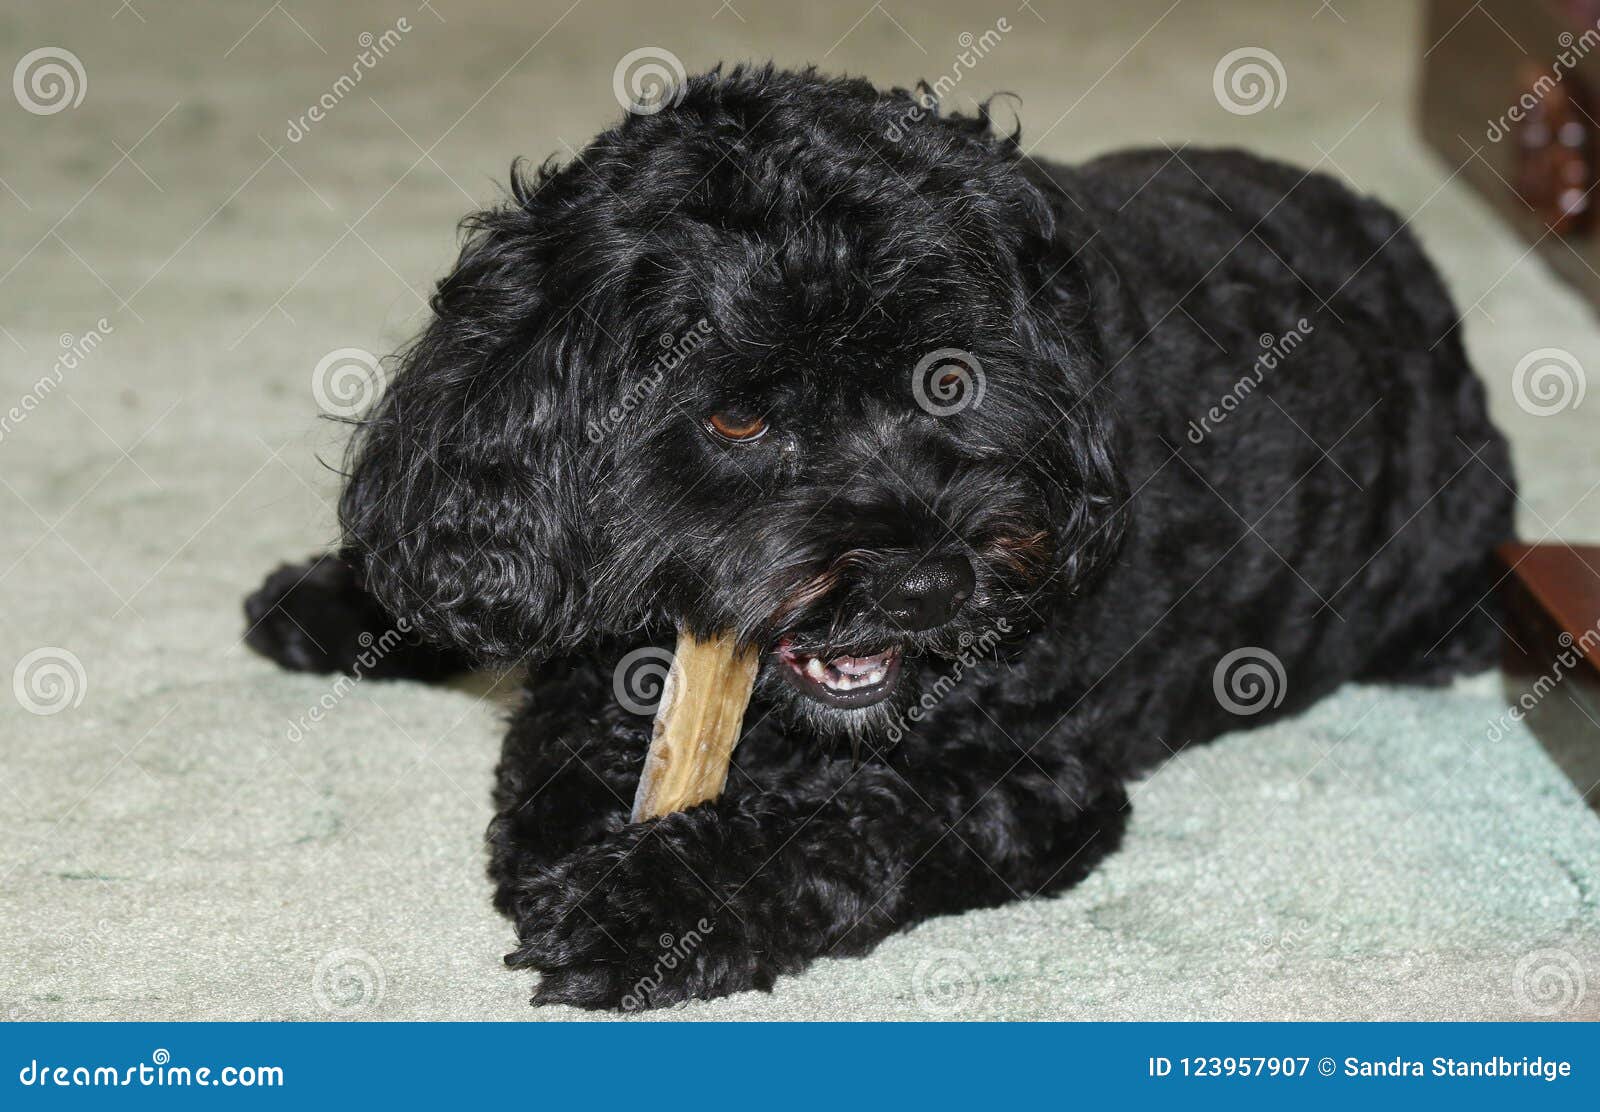 A Cute Cavapoo Dog Also Commonly Known By The Names Poodle X King Charles Cavalier Spaniel Cavoodle And Cavoo Eating A Bone Stock Image Image Of Cute Head 123957907